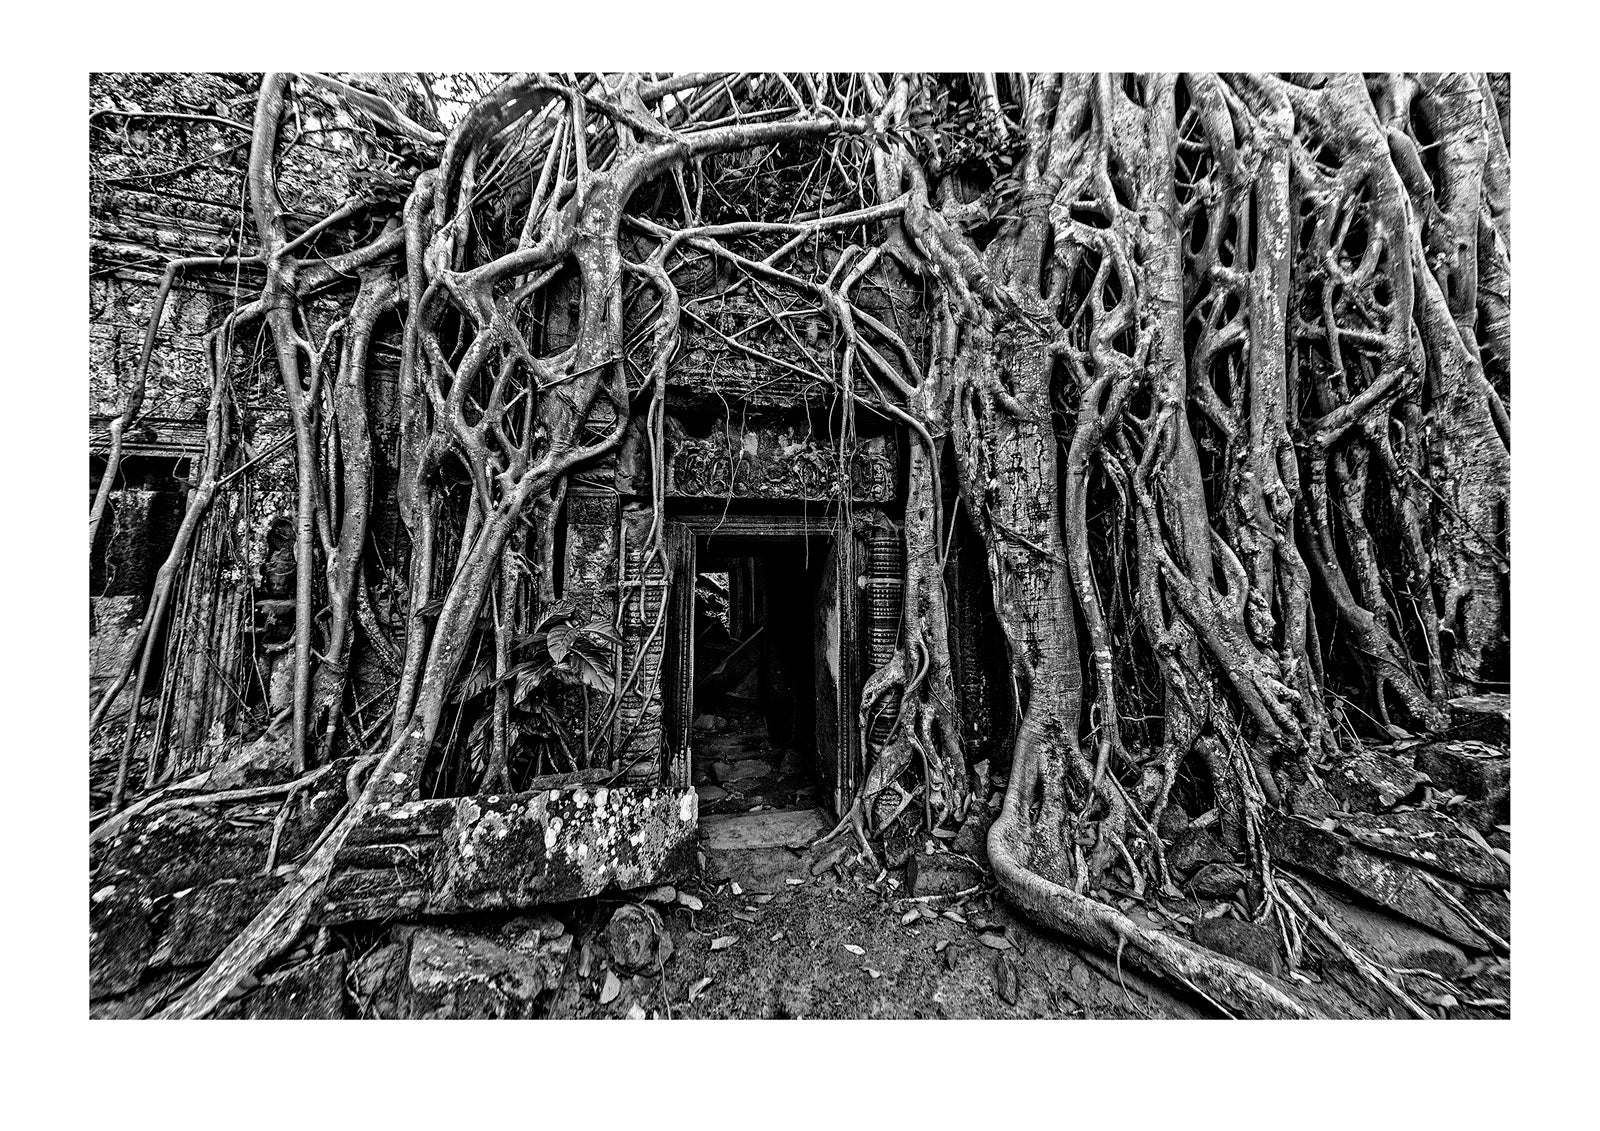 The roots of an enormous fig tree encase ancient ruins in Cambodia. The dense forests of this tropical country hide the secrets of past civilisations. Angkor Wat, Siem Reap, Cambodia.